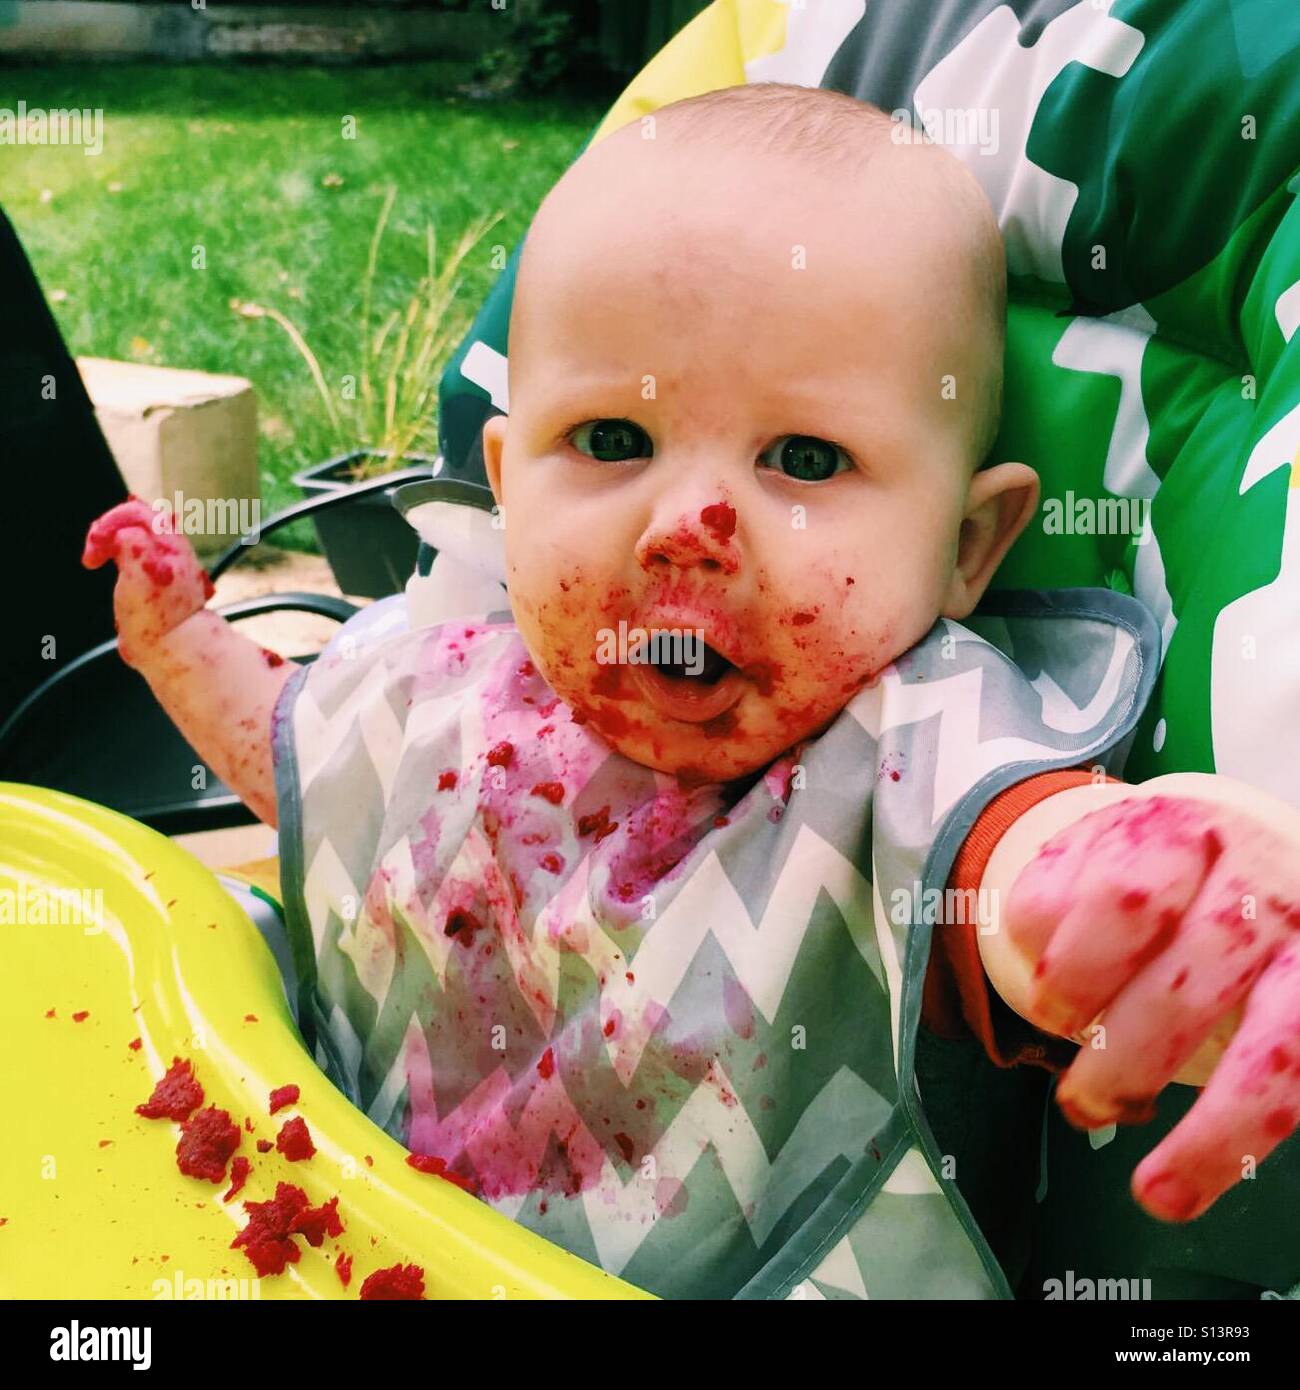 Messy baby eating Stock Photo